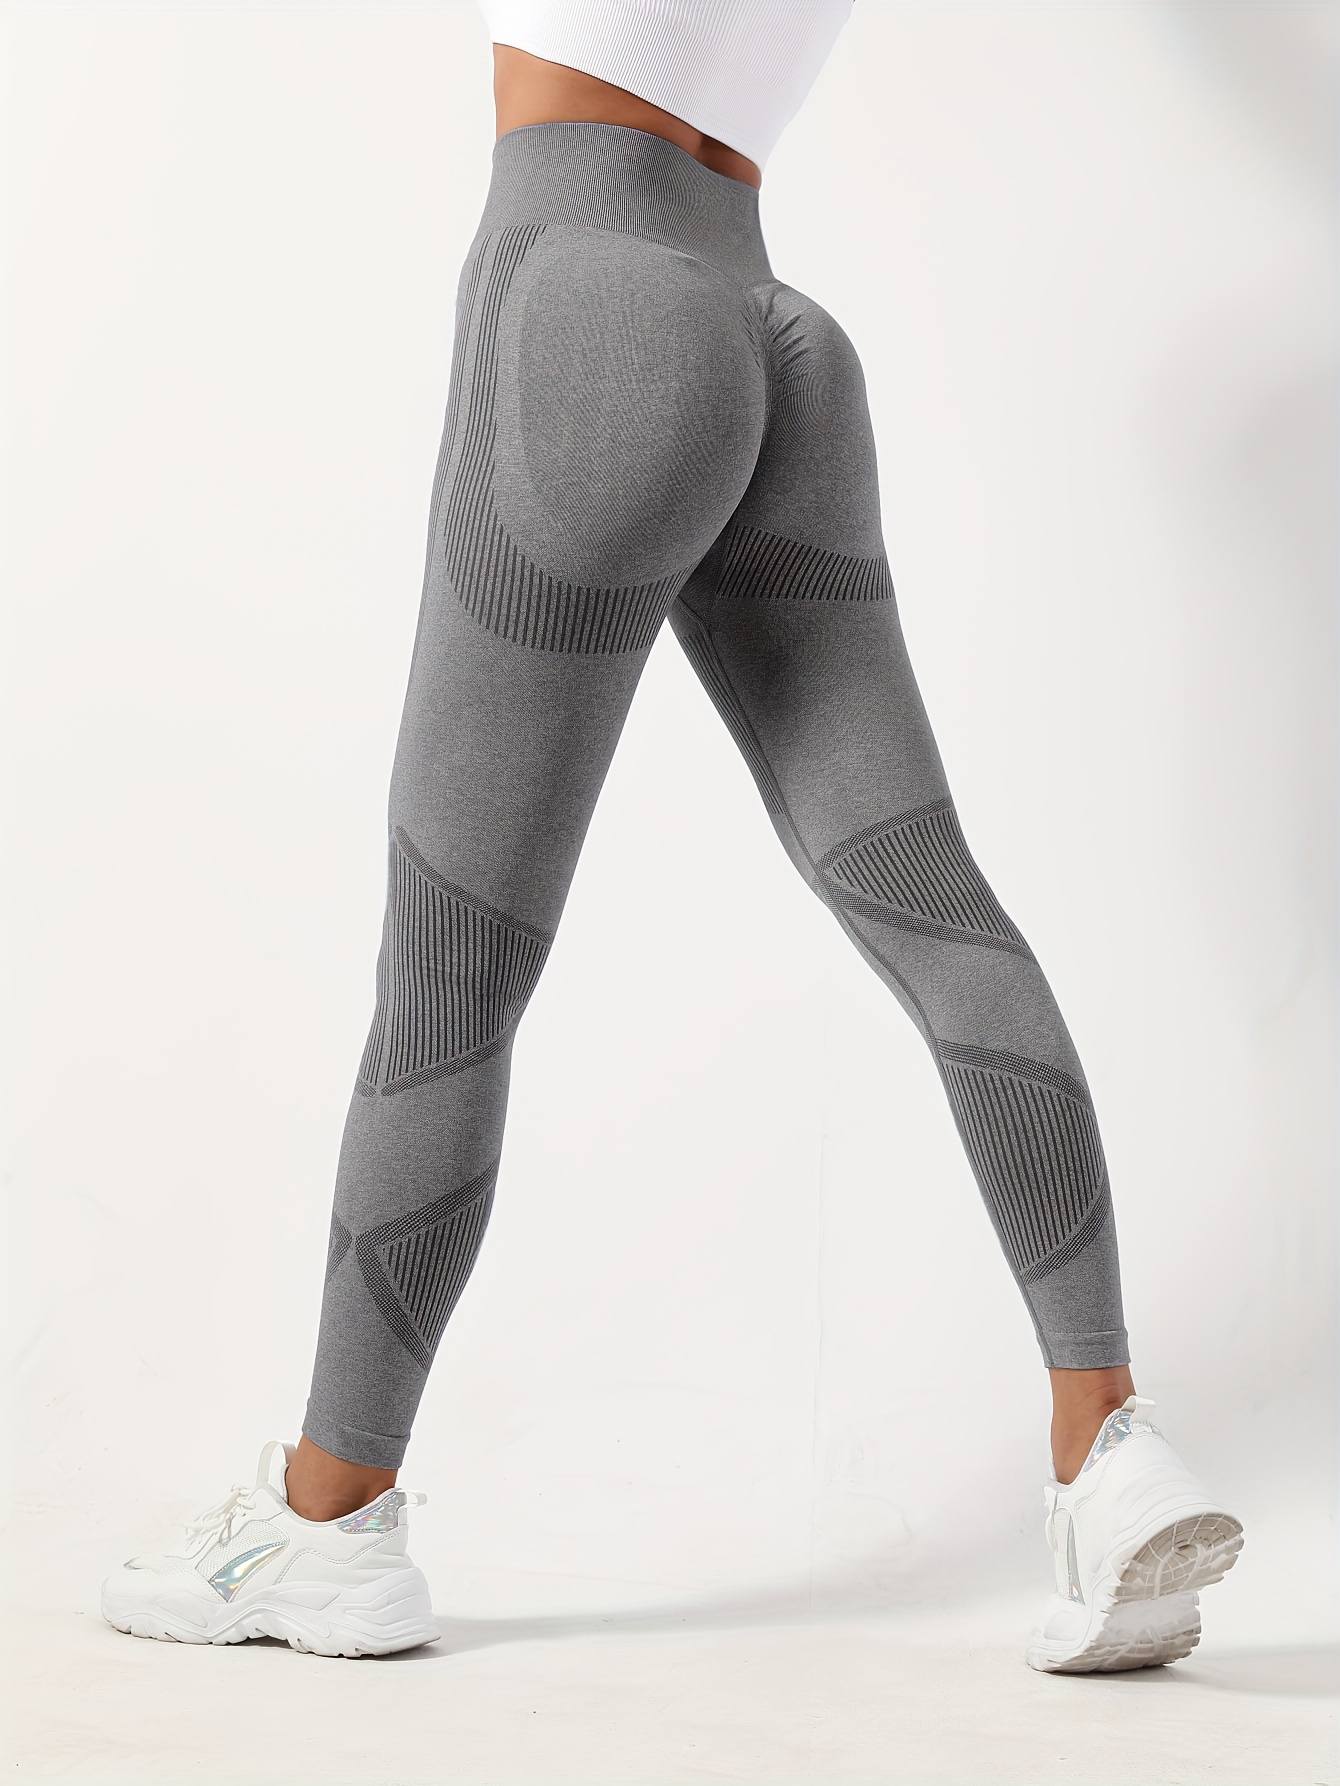 TrainingGirl Mesh Leggings for Women High Waisted Yoga Pants Workout Running  Printed Leggings Gym Sports Tights with Pockets (Grey, X-Large), Grey, XL  price in UAE,  UAE